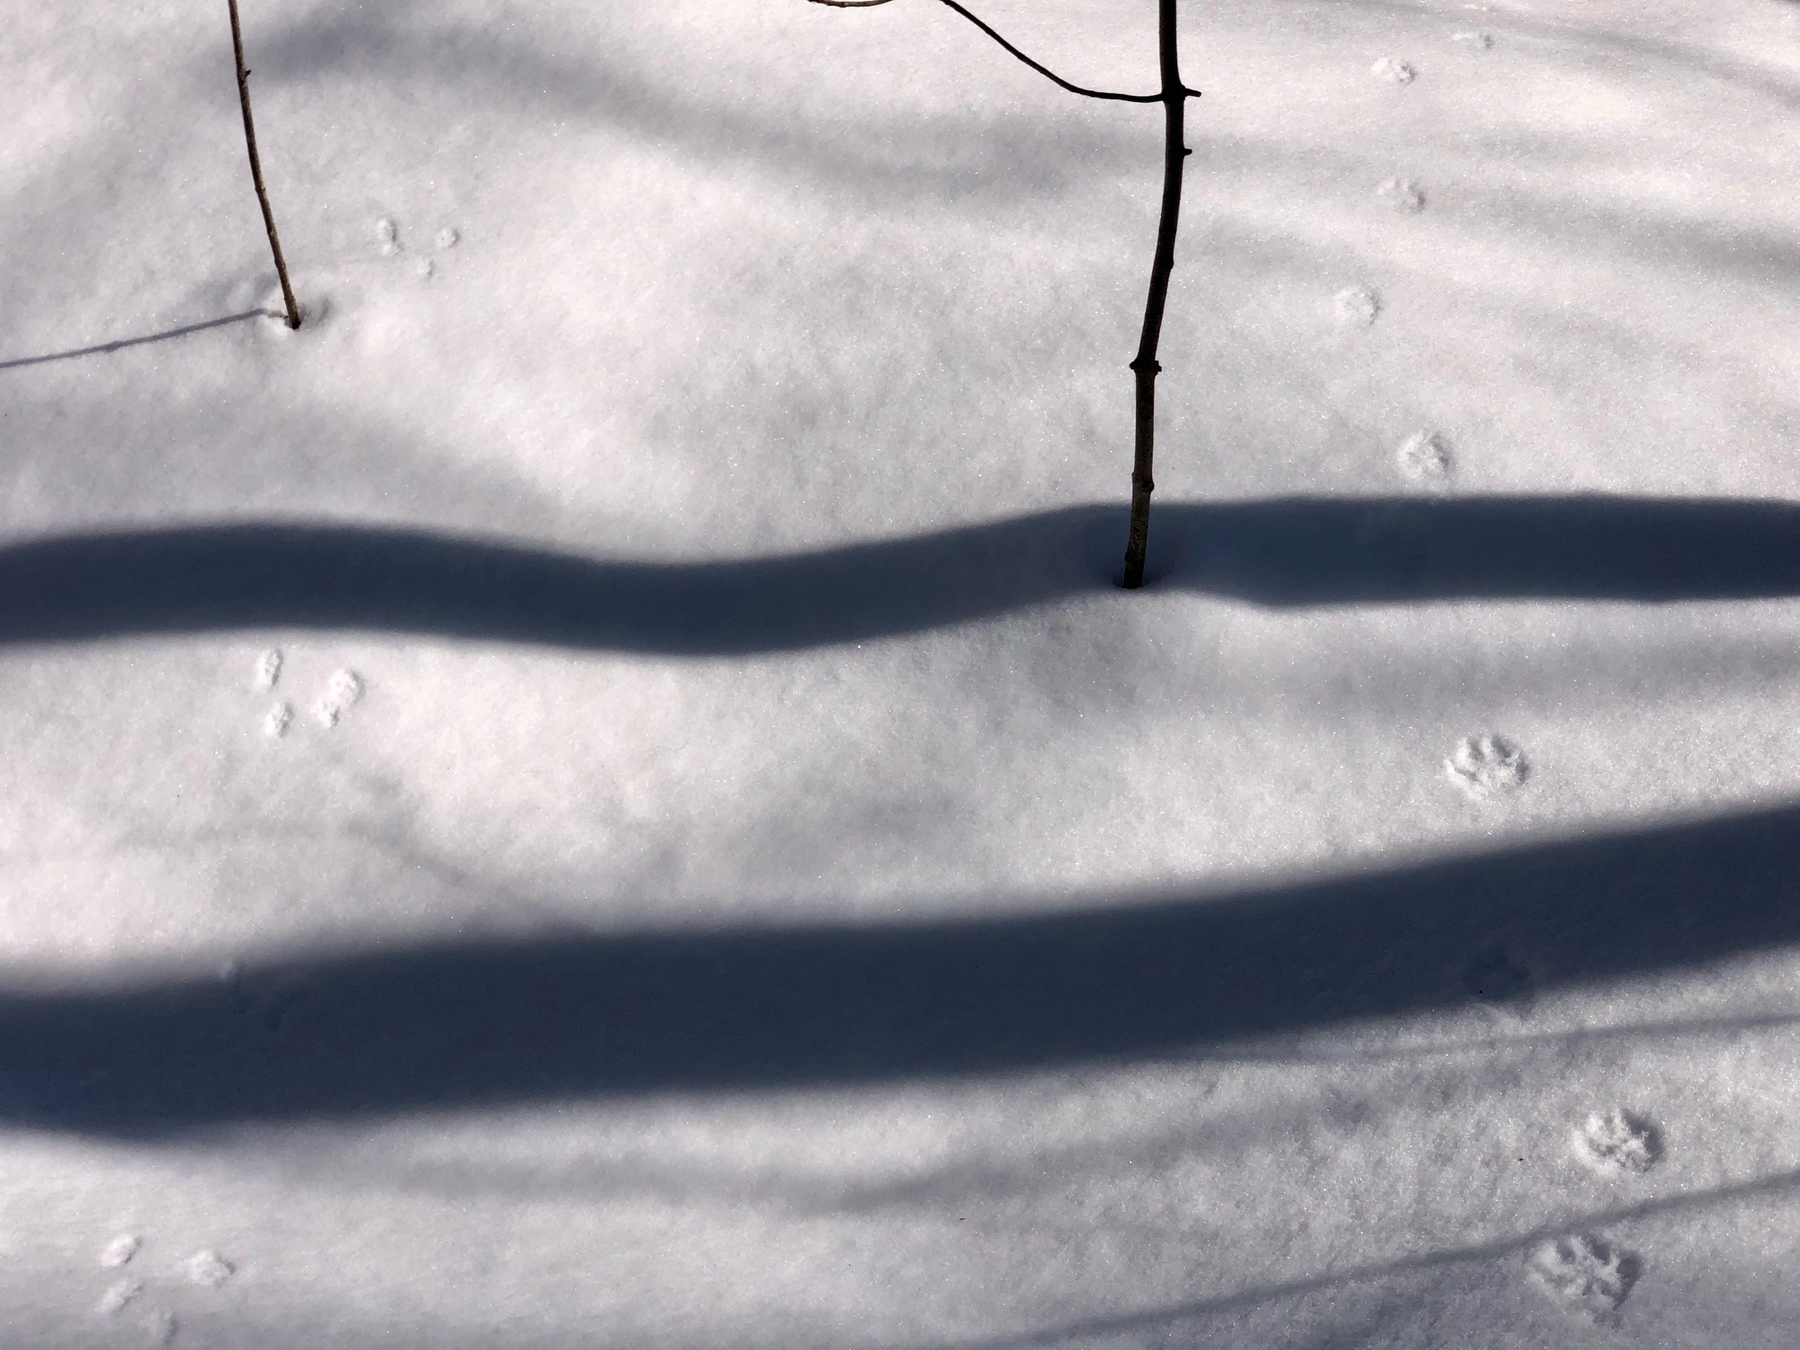 animal tracks in snow. 2 large with 2 small prints beywren and behind from a rabbit and larger paw promts spread out alternating left and right for the fox